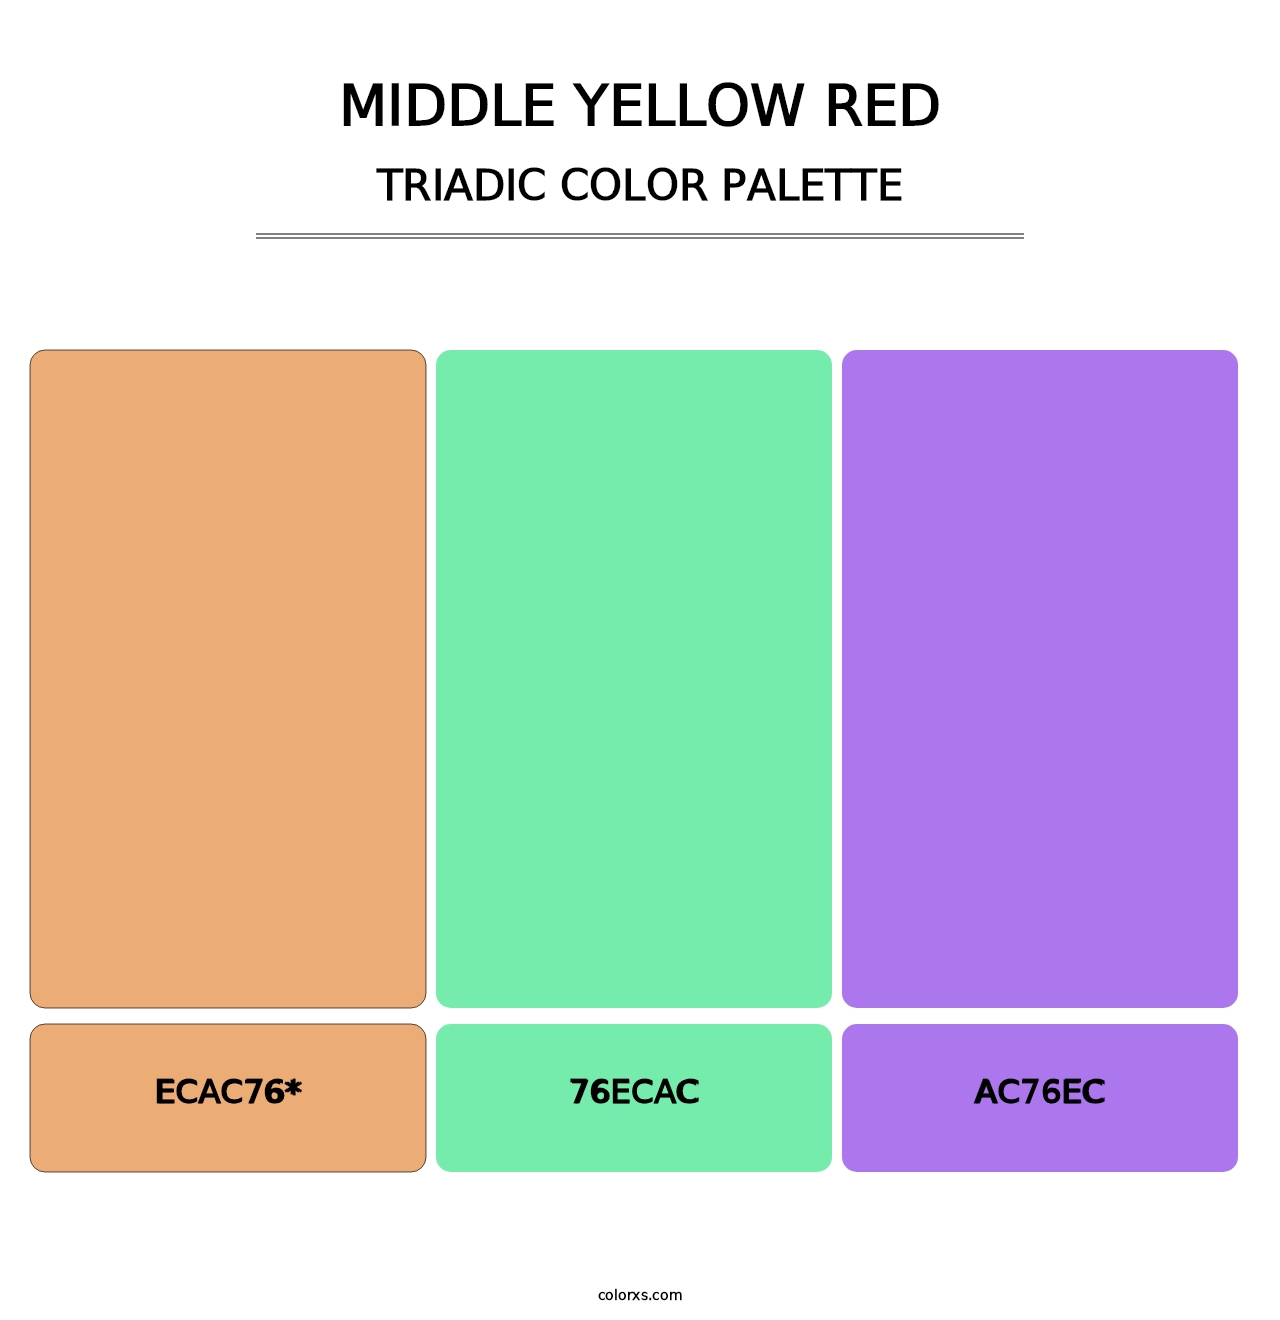 Middle Yellow Red - Triadic Color Palette